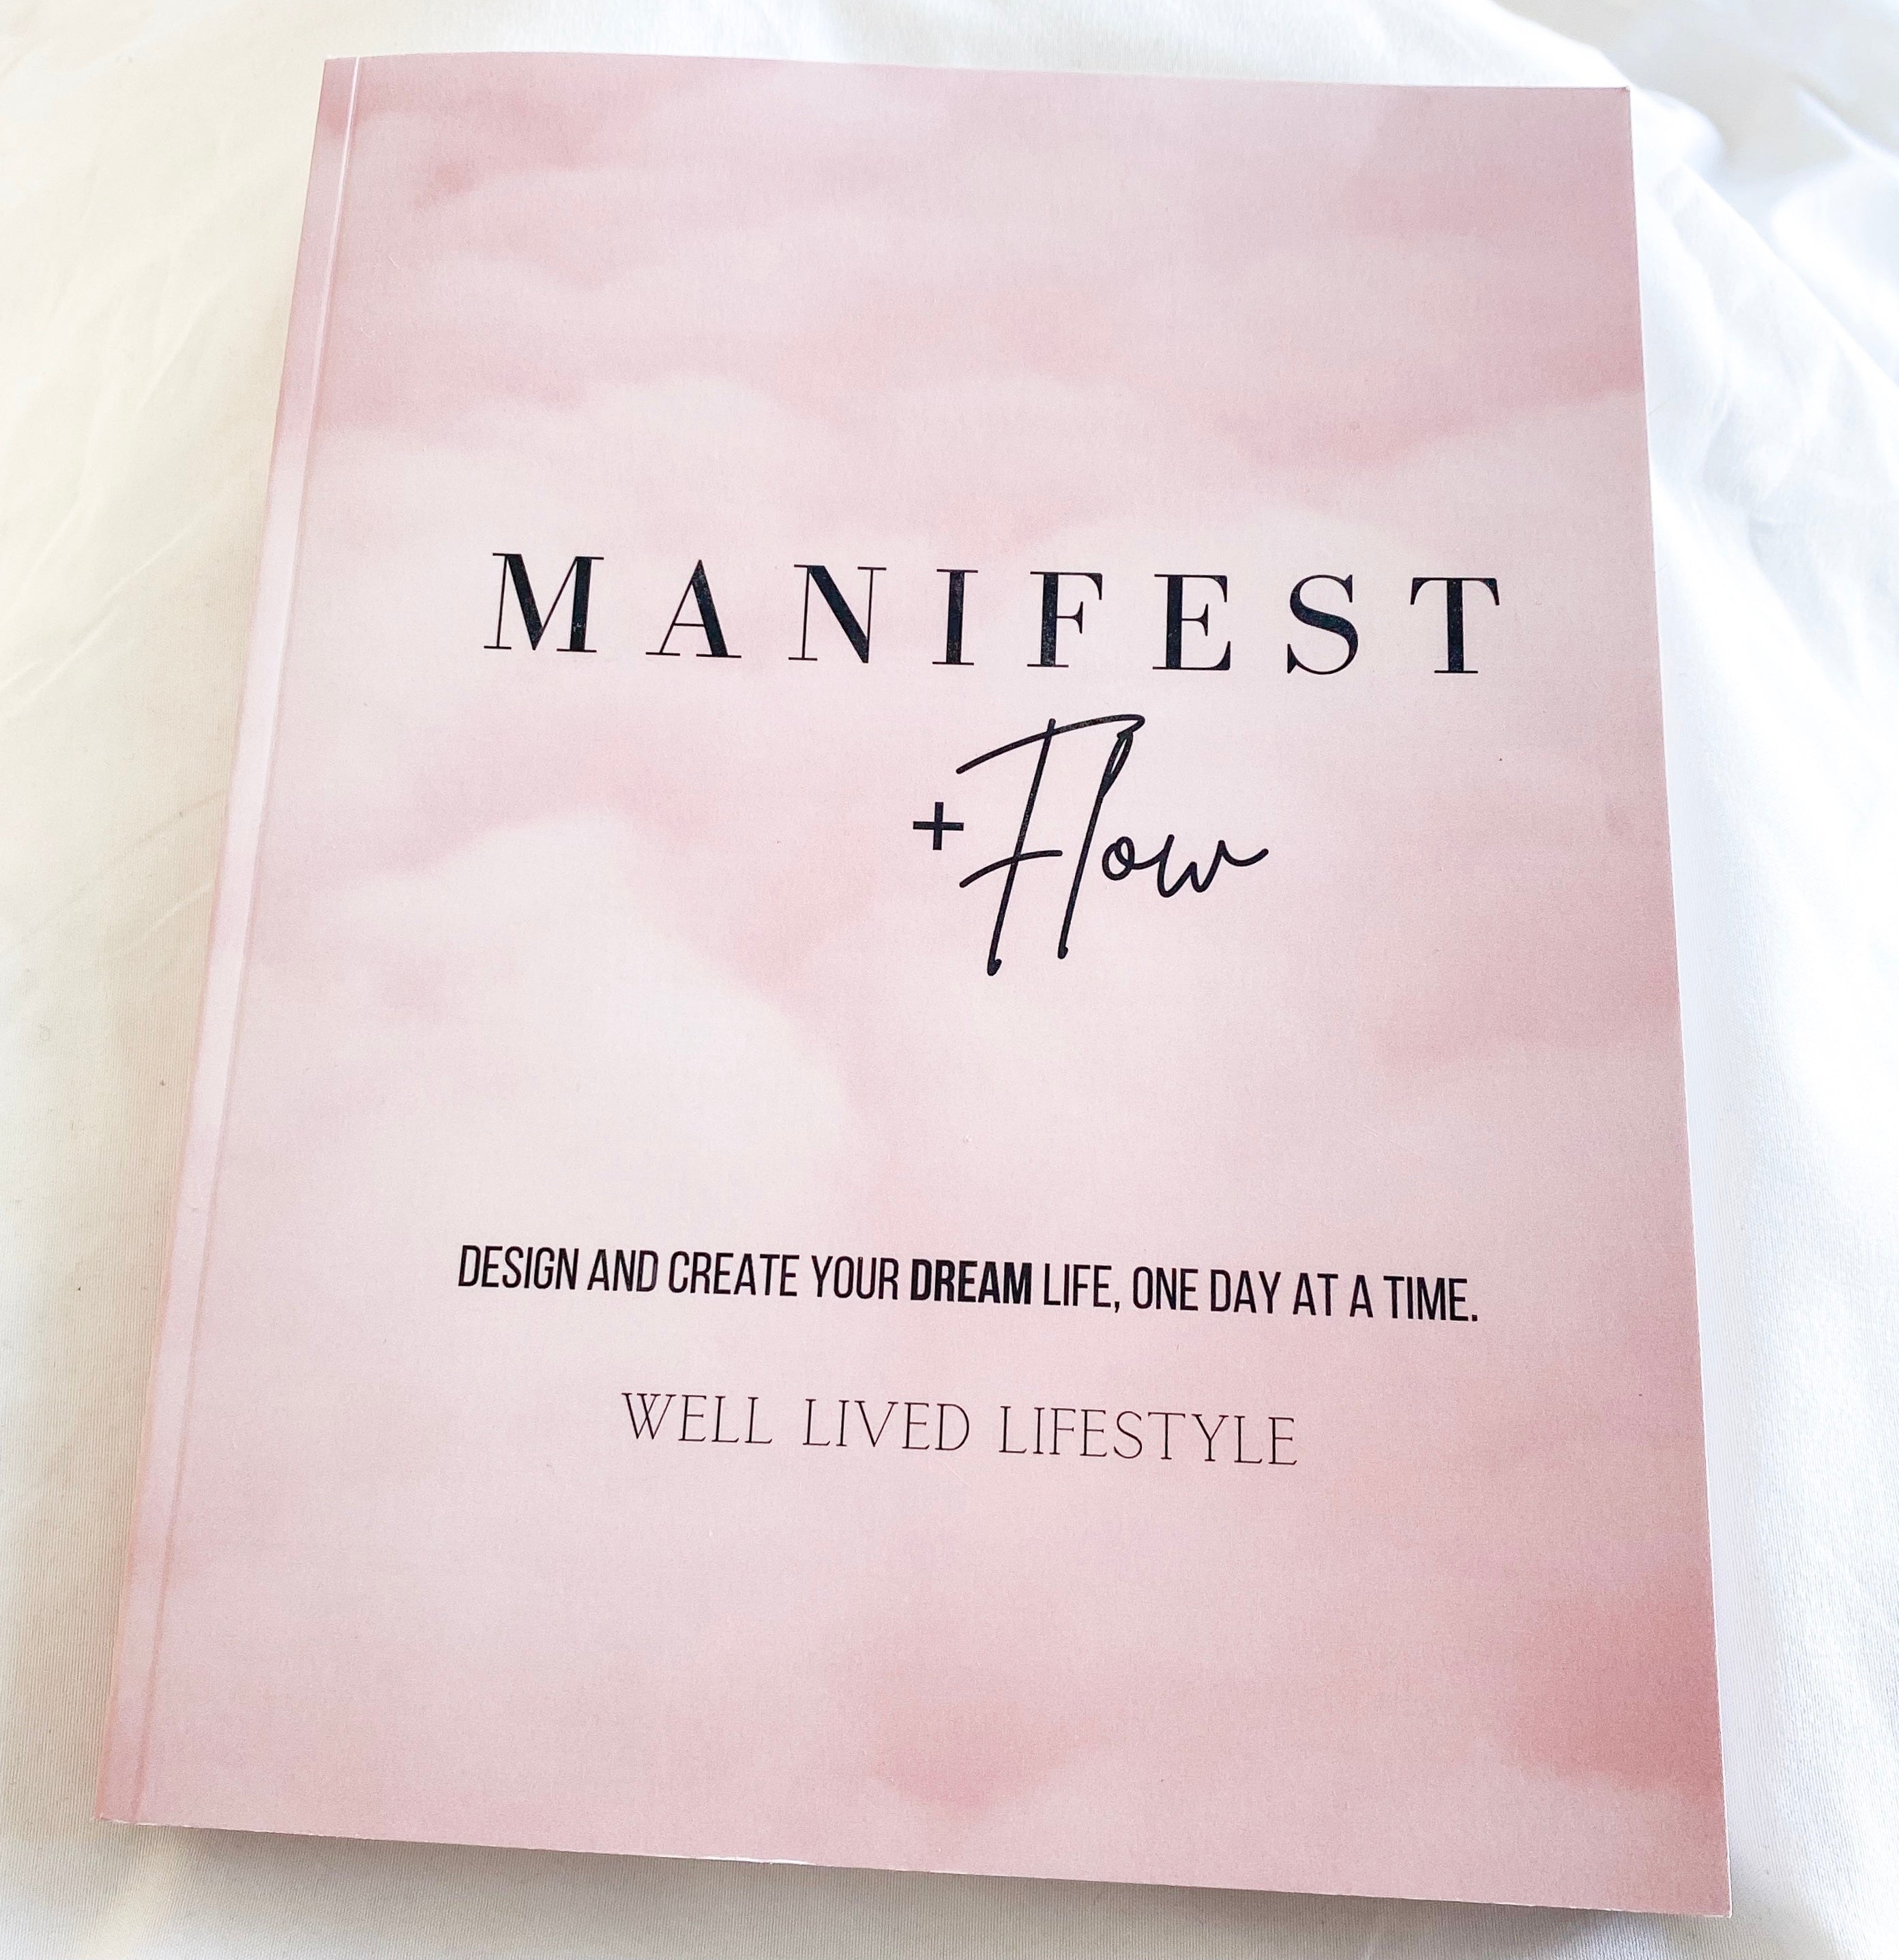 The Manifestation Journal That Changed My Life